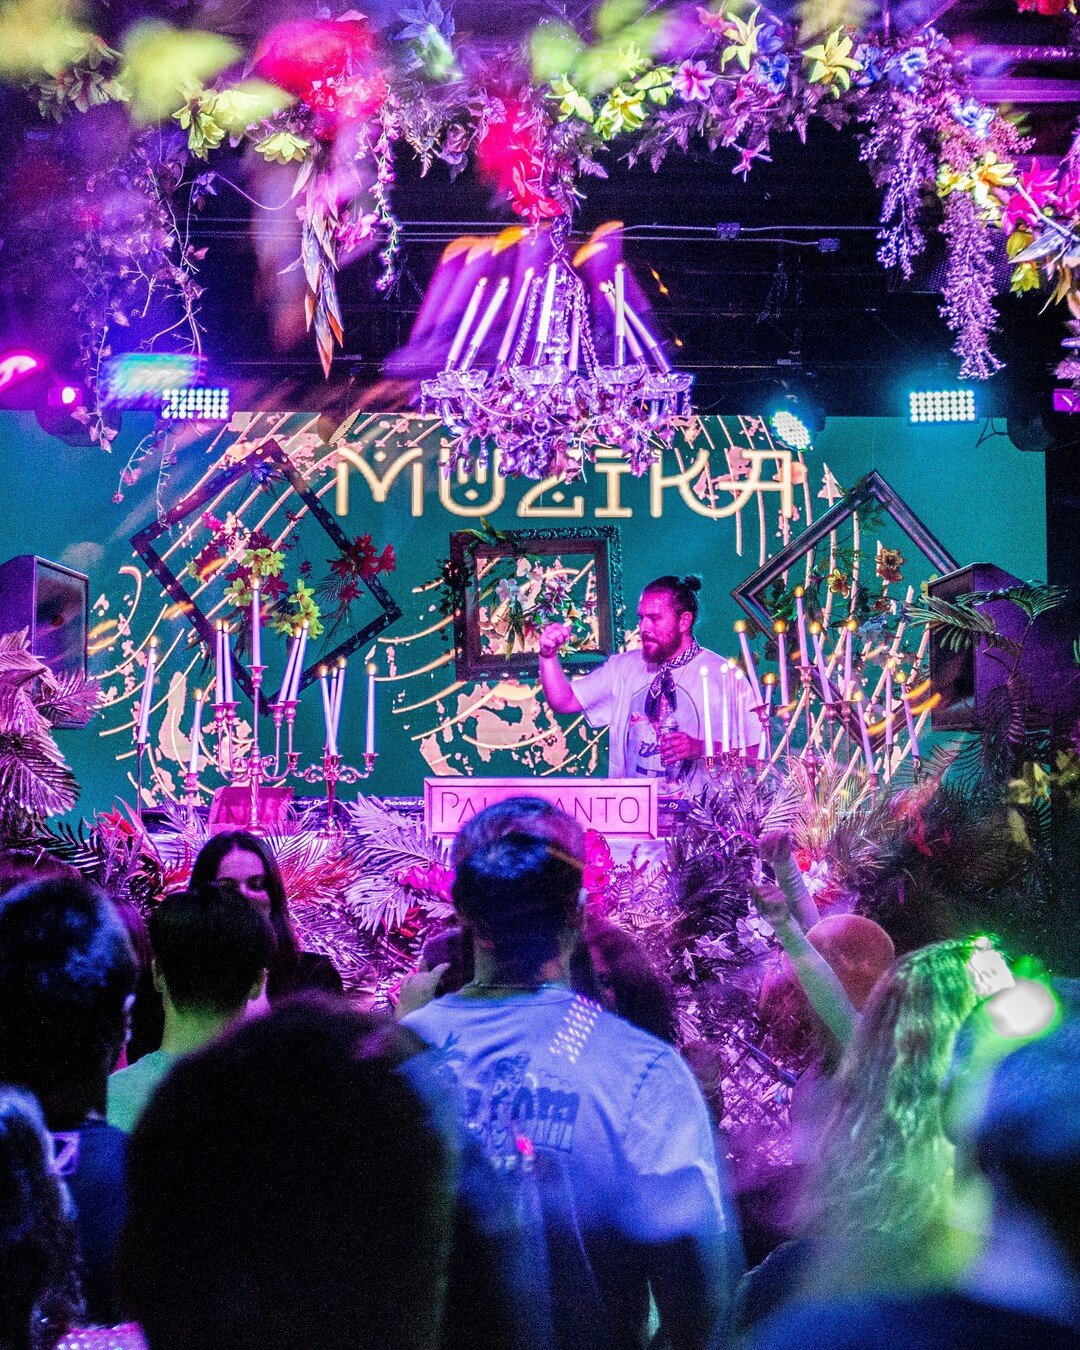 Some last incredible moments captured of our 🌸 🌺 jungle and it&rsquo;s creatures 🎧🎶🦓

#performers #eventconcepts #dj #nightlifedesign #nycnightlife #nightlifedesigners #newyorkevents #junglevibes #jungletheme